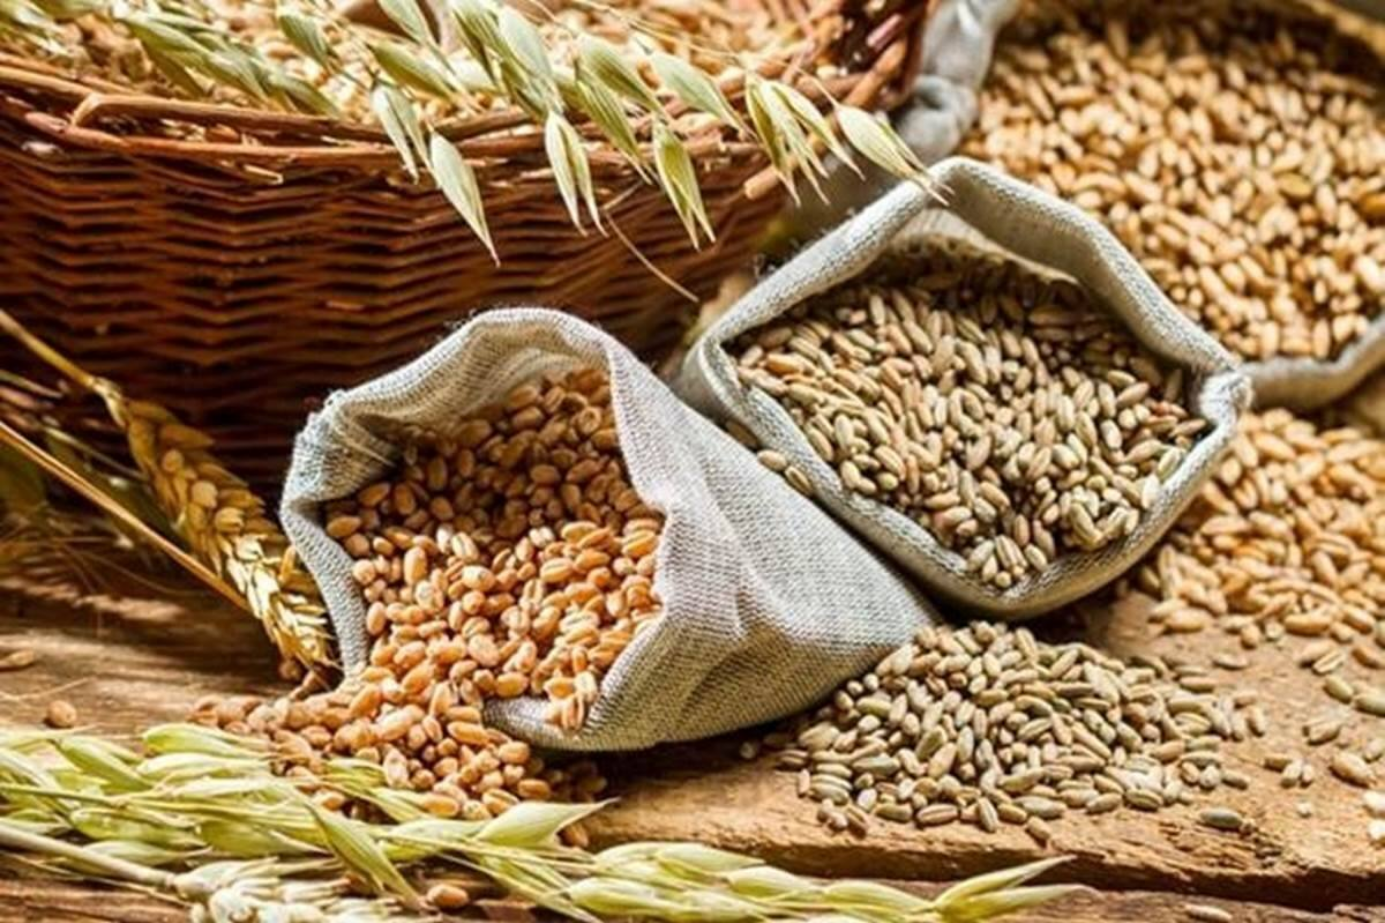 Kharif foodgrains production likely to be record 144.52 mn tonnes in 2020-21: Agri Minister